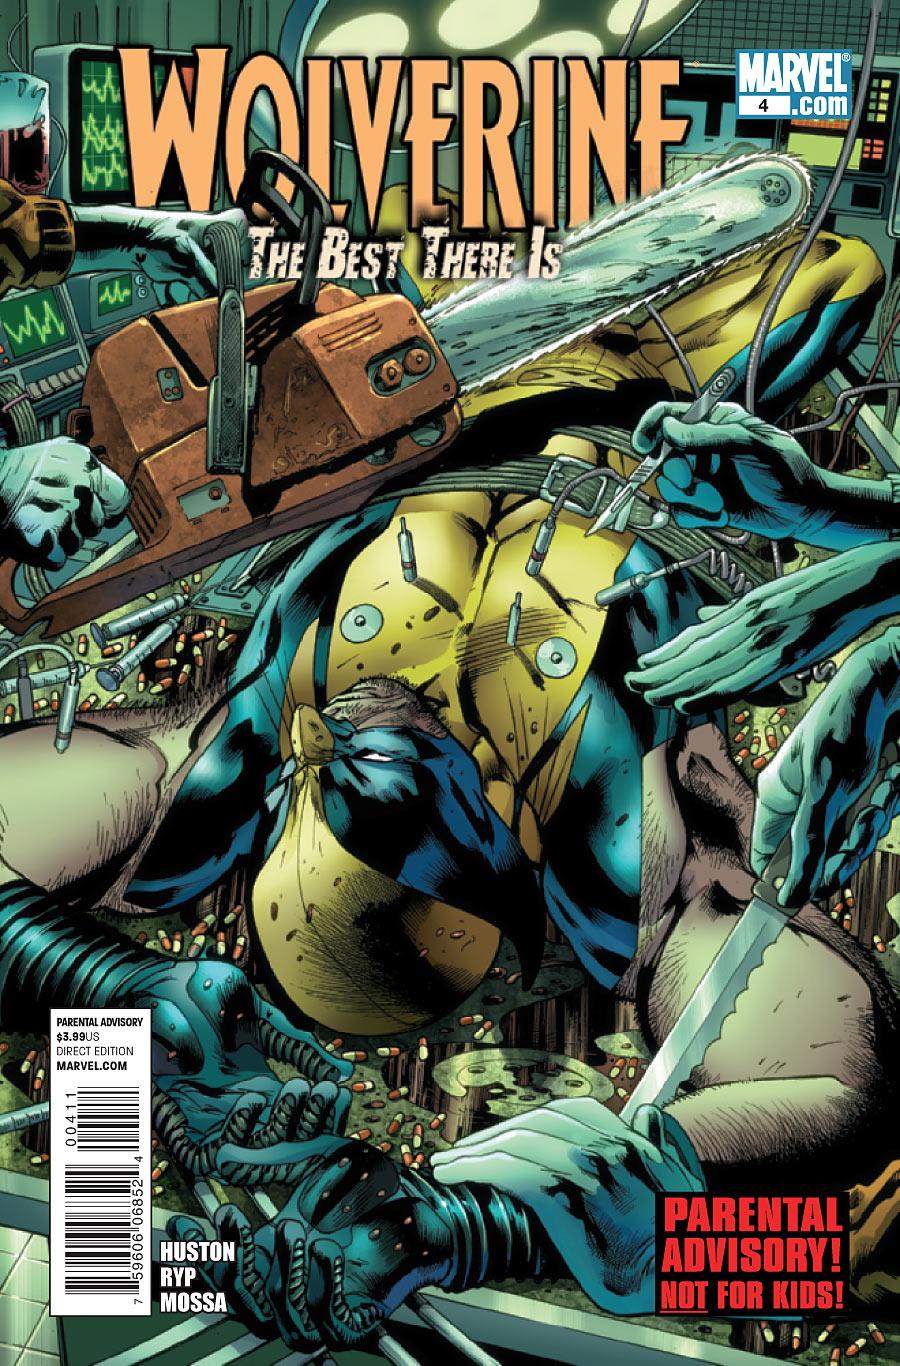 Wolverine: The Best There Is Vol. 1 #4